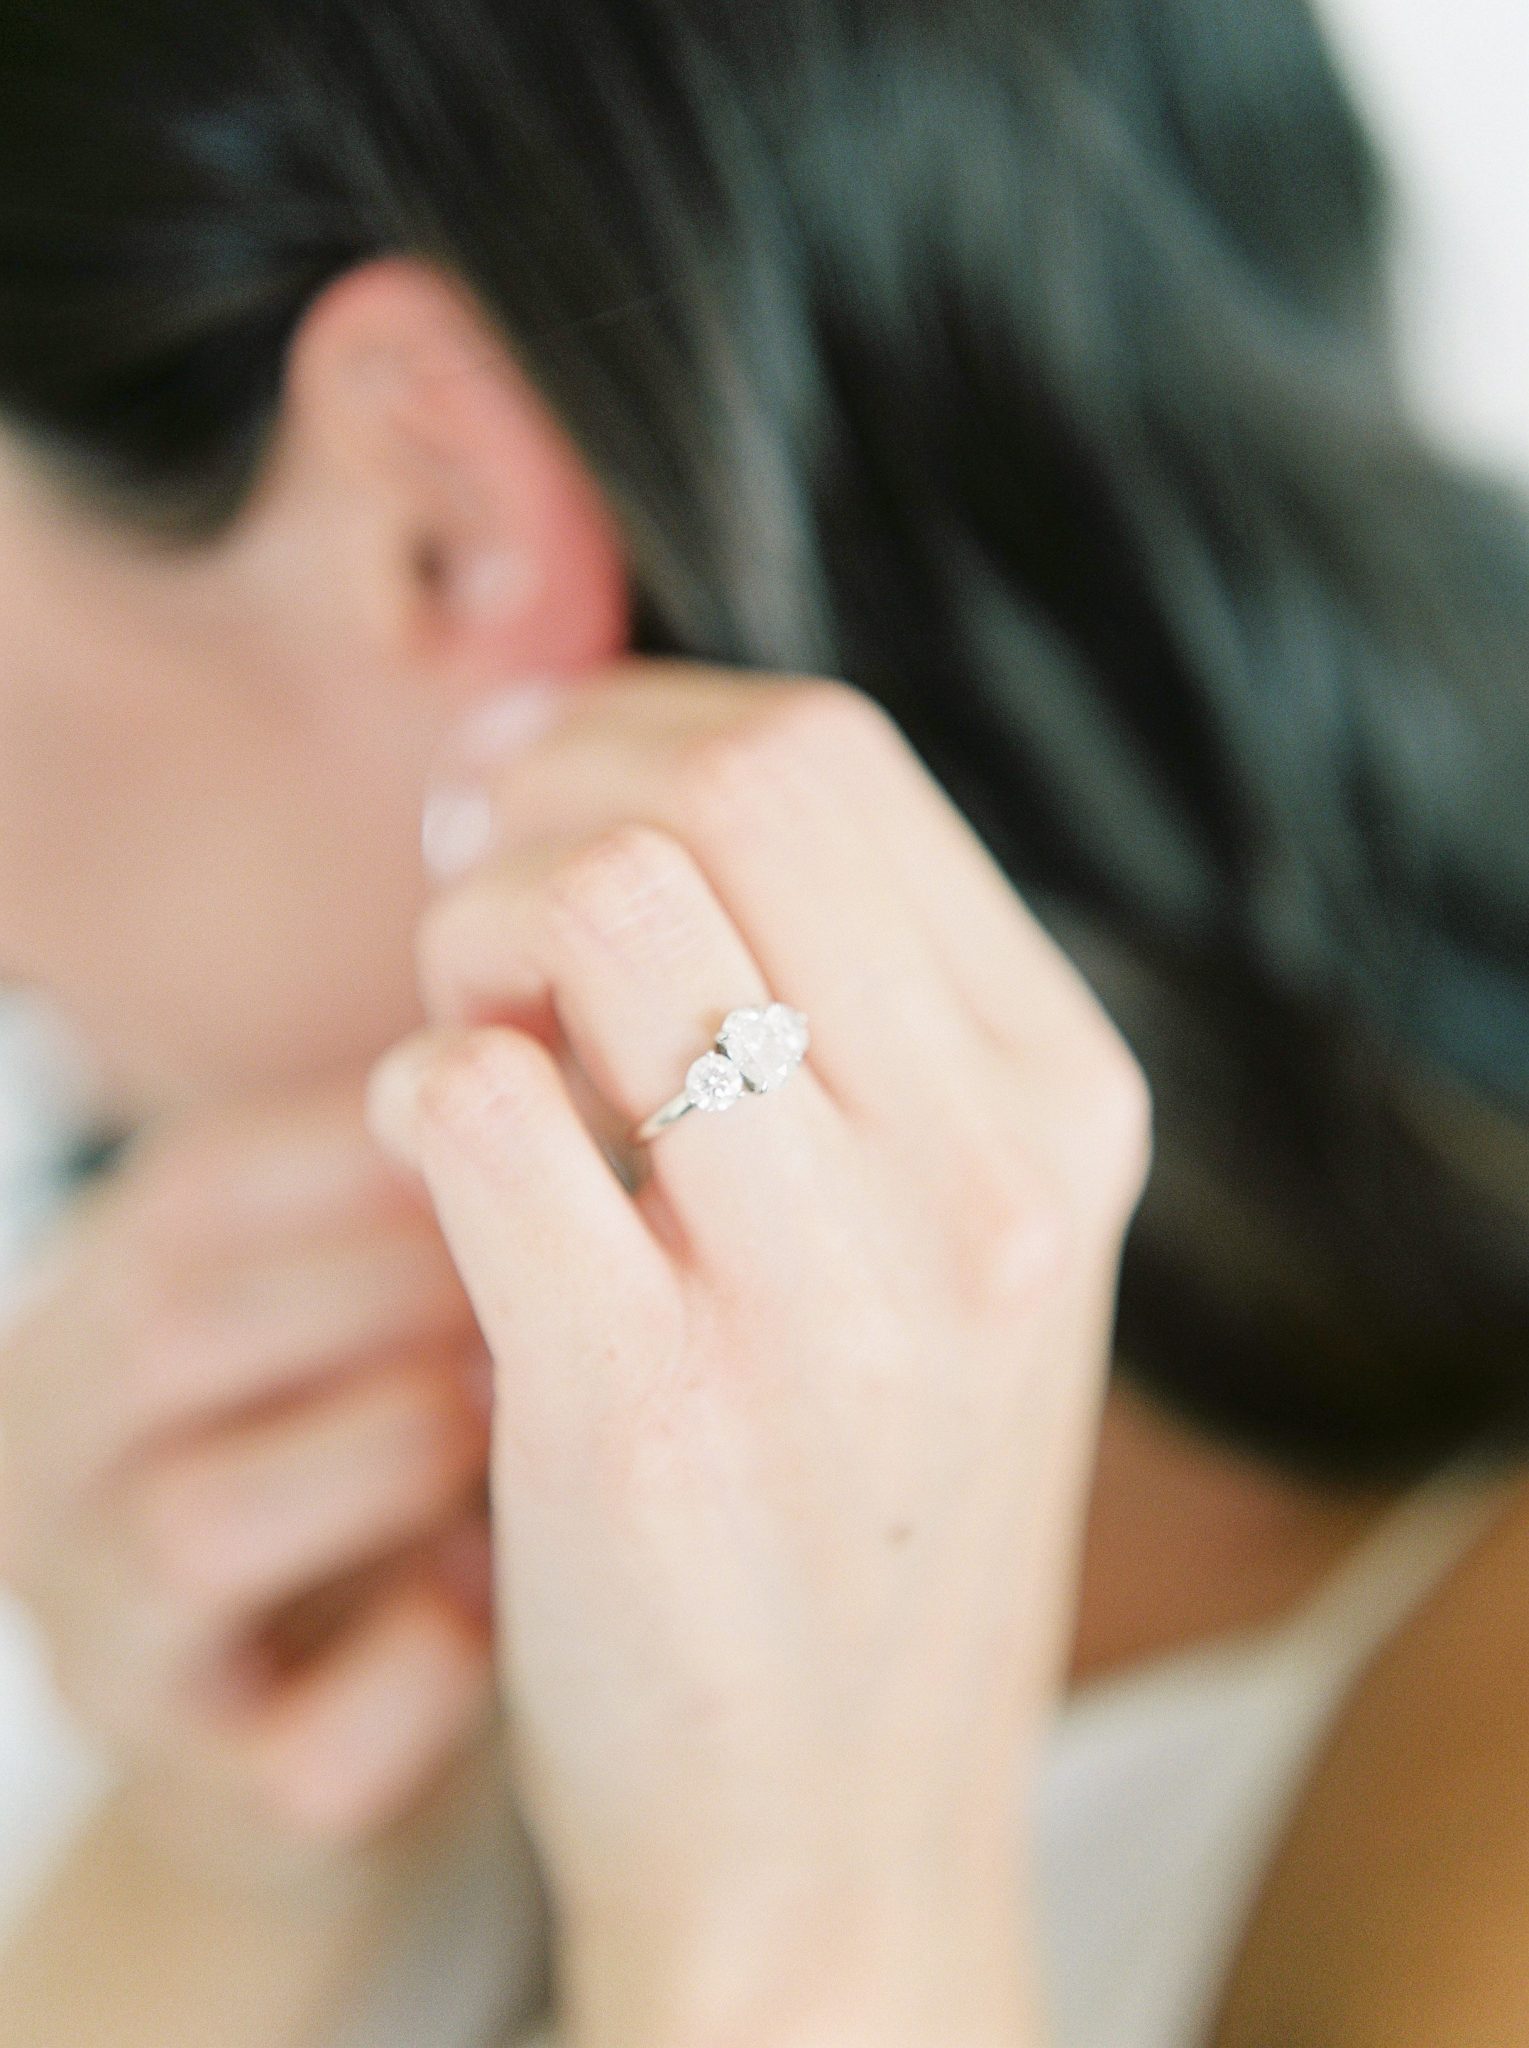 A modern Okanagan bride adjusts her bridal earrings with her engagement ring in the foreground